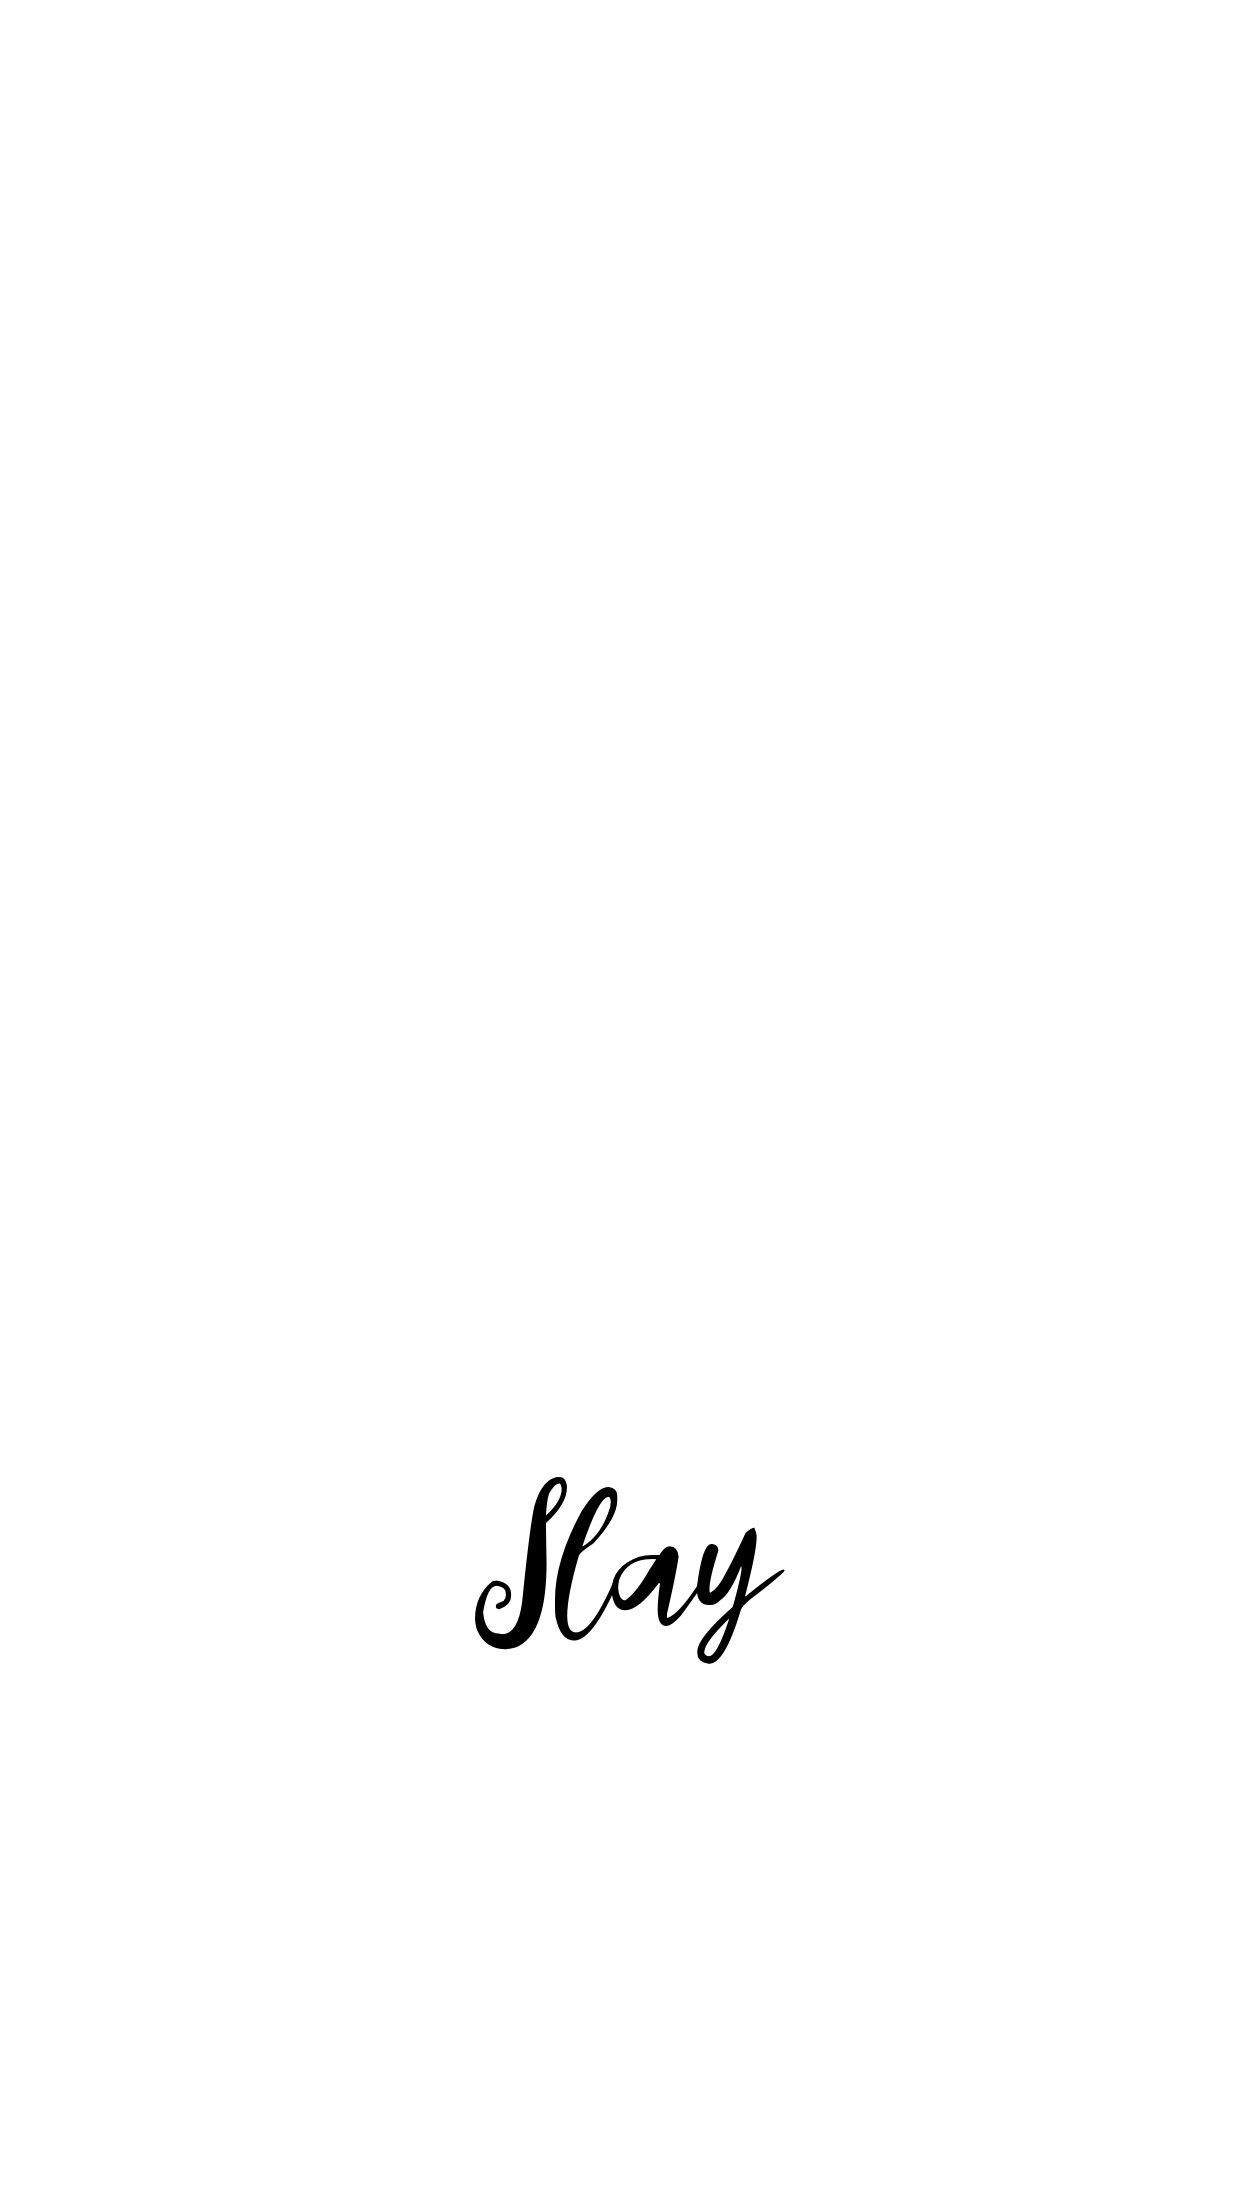 A black and white image of the word stay - White